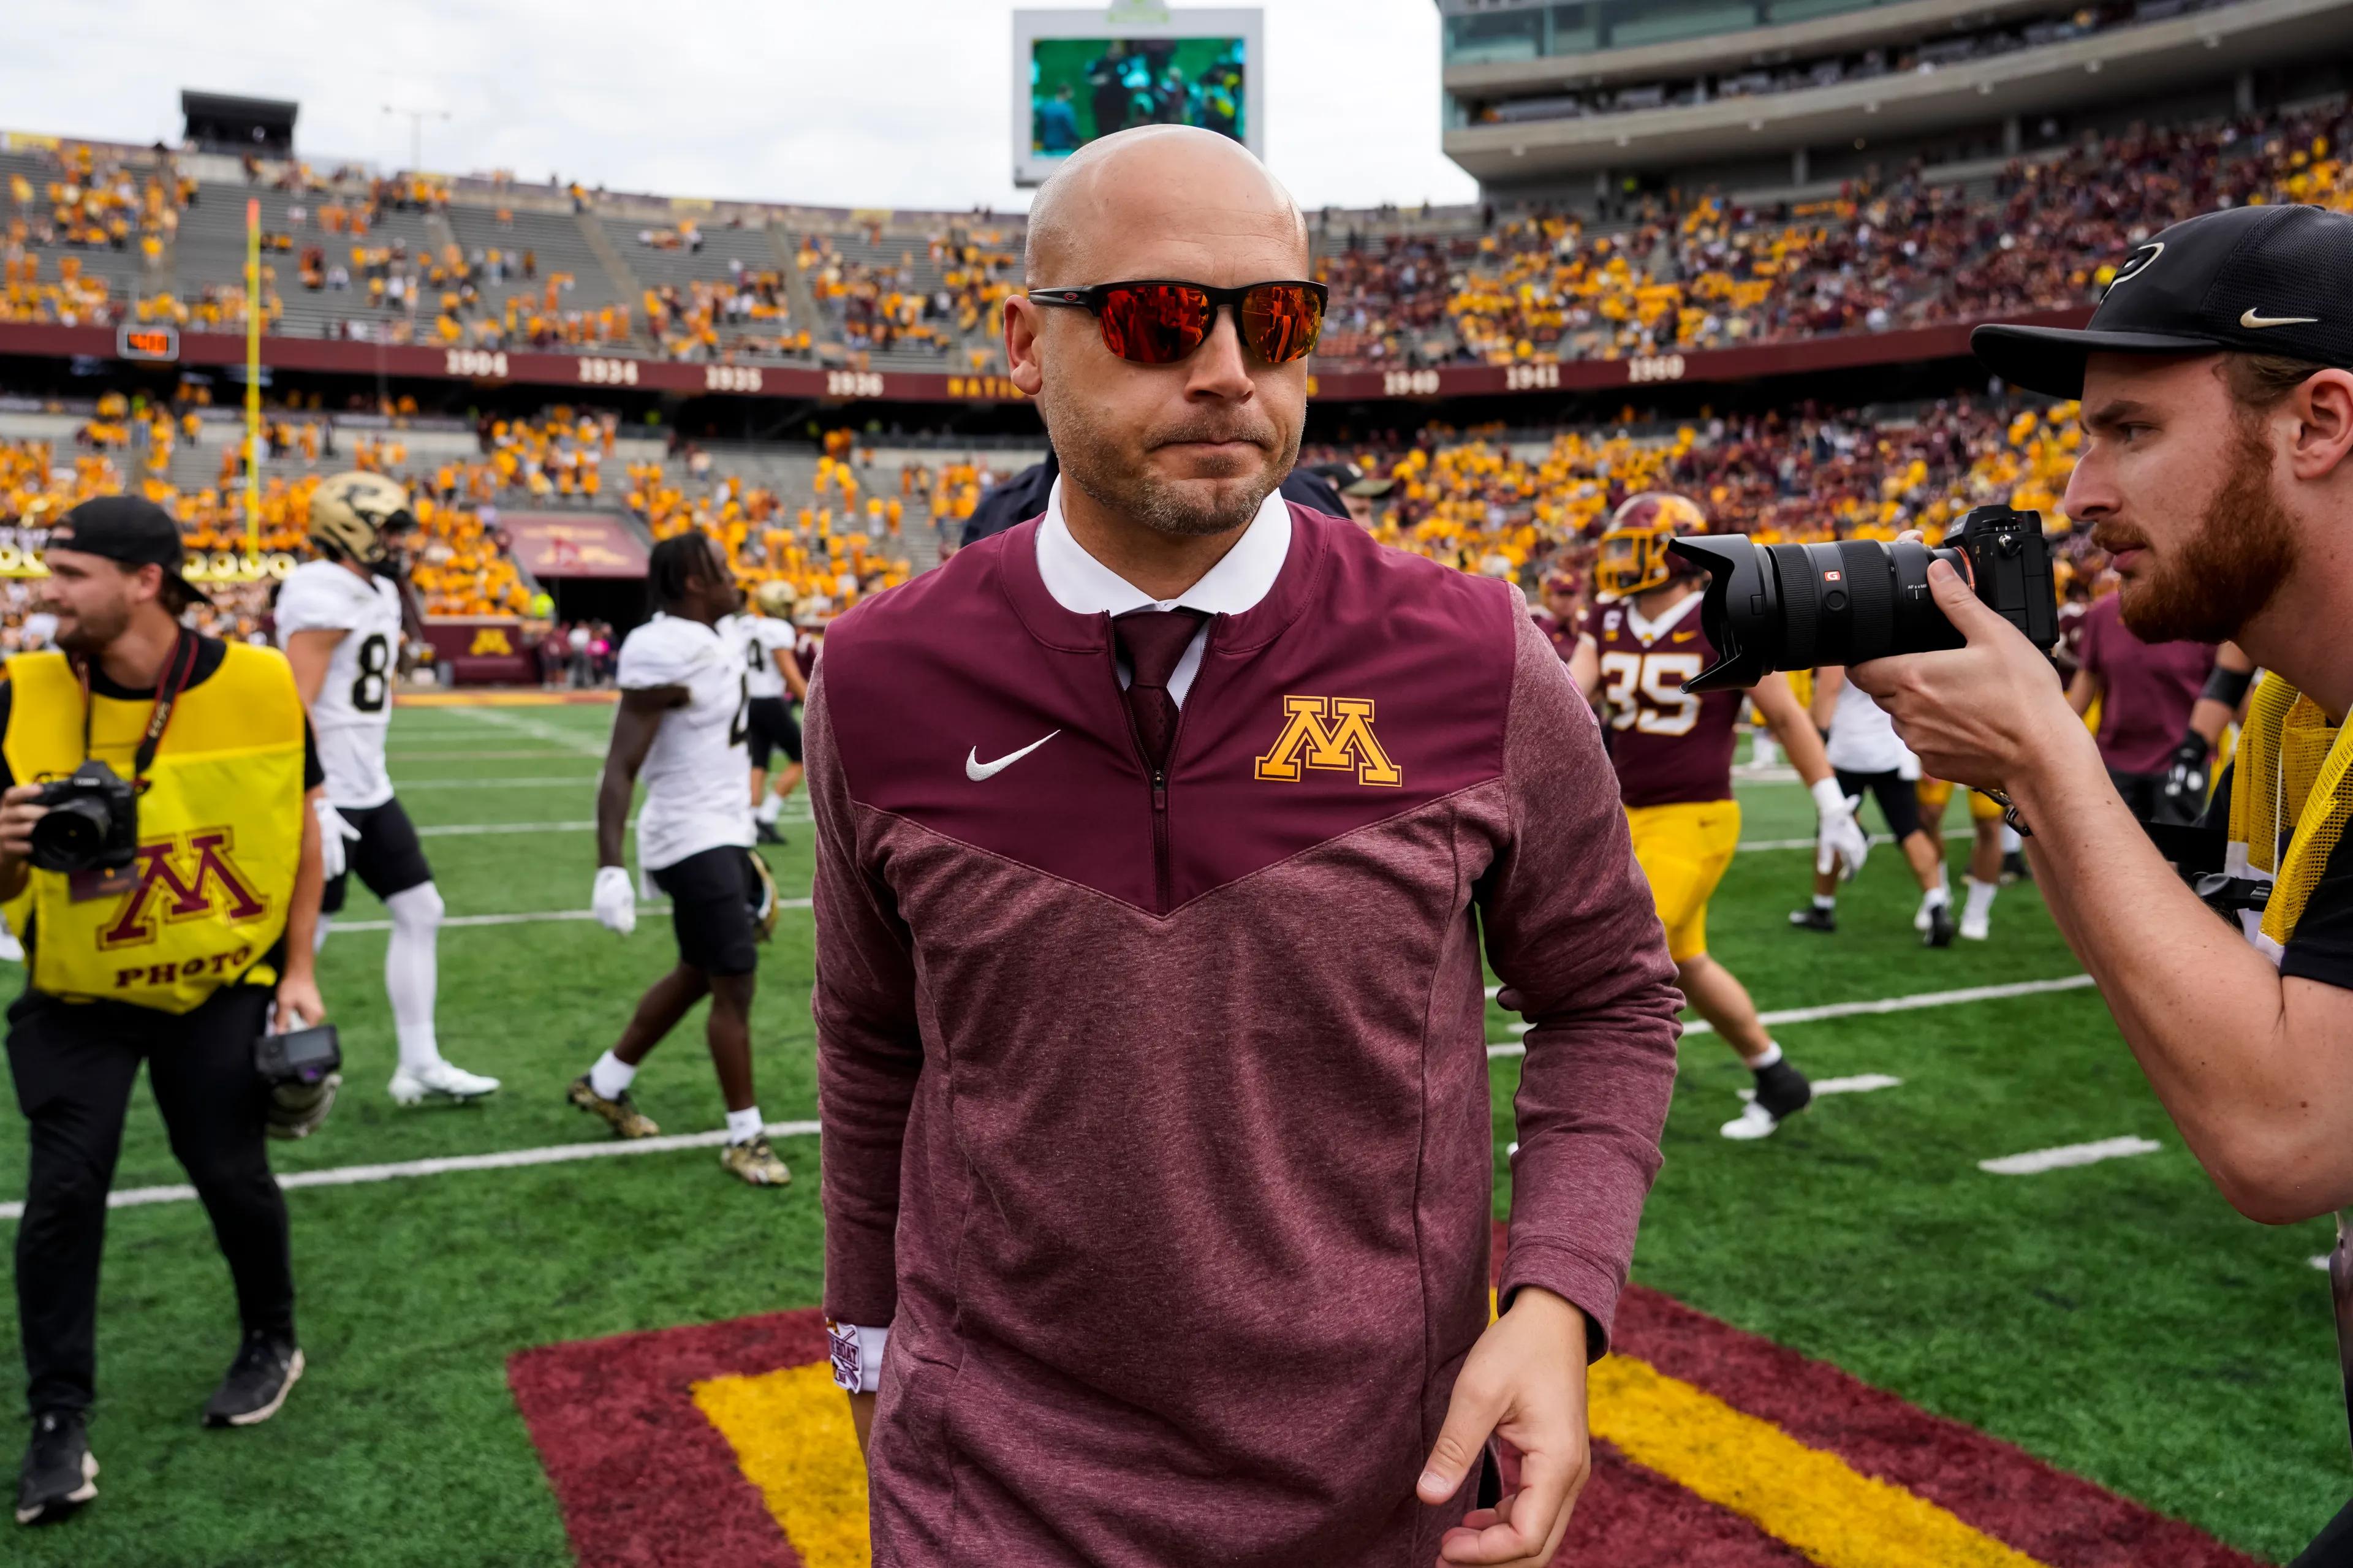 Head coach P.J. Fleck of the Minnesota Golden Gophers walks off the field against the Purdue Boilermakers at Huntington Bank Stadium on October 1, 2022 in Minneapolis, Minnesota. Purdue defeated Minnesota 20-10.